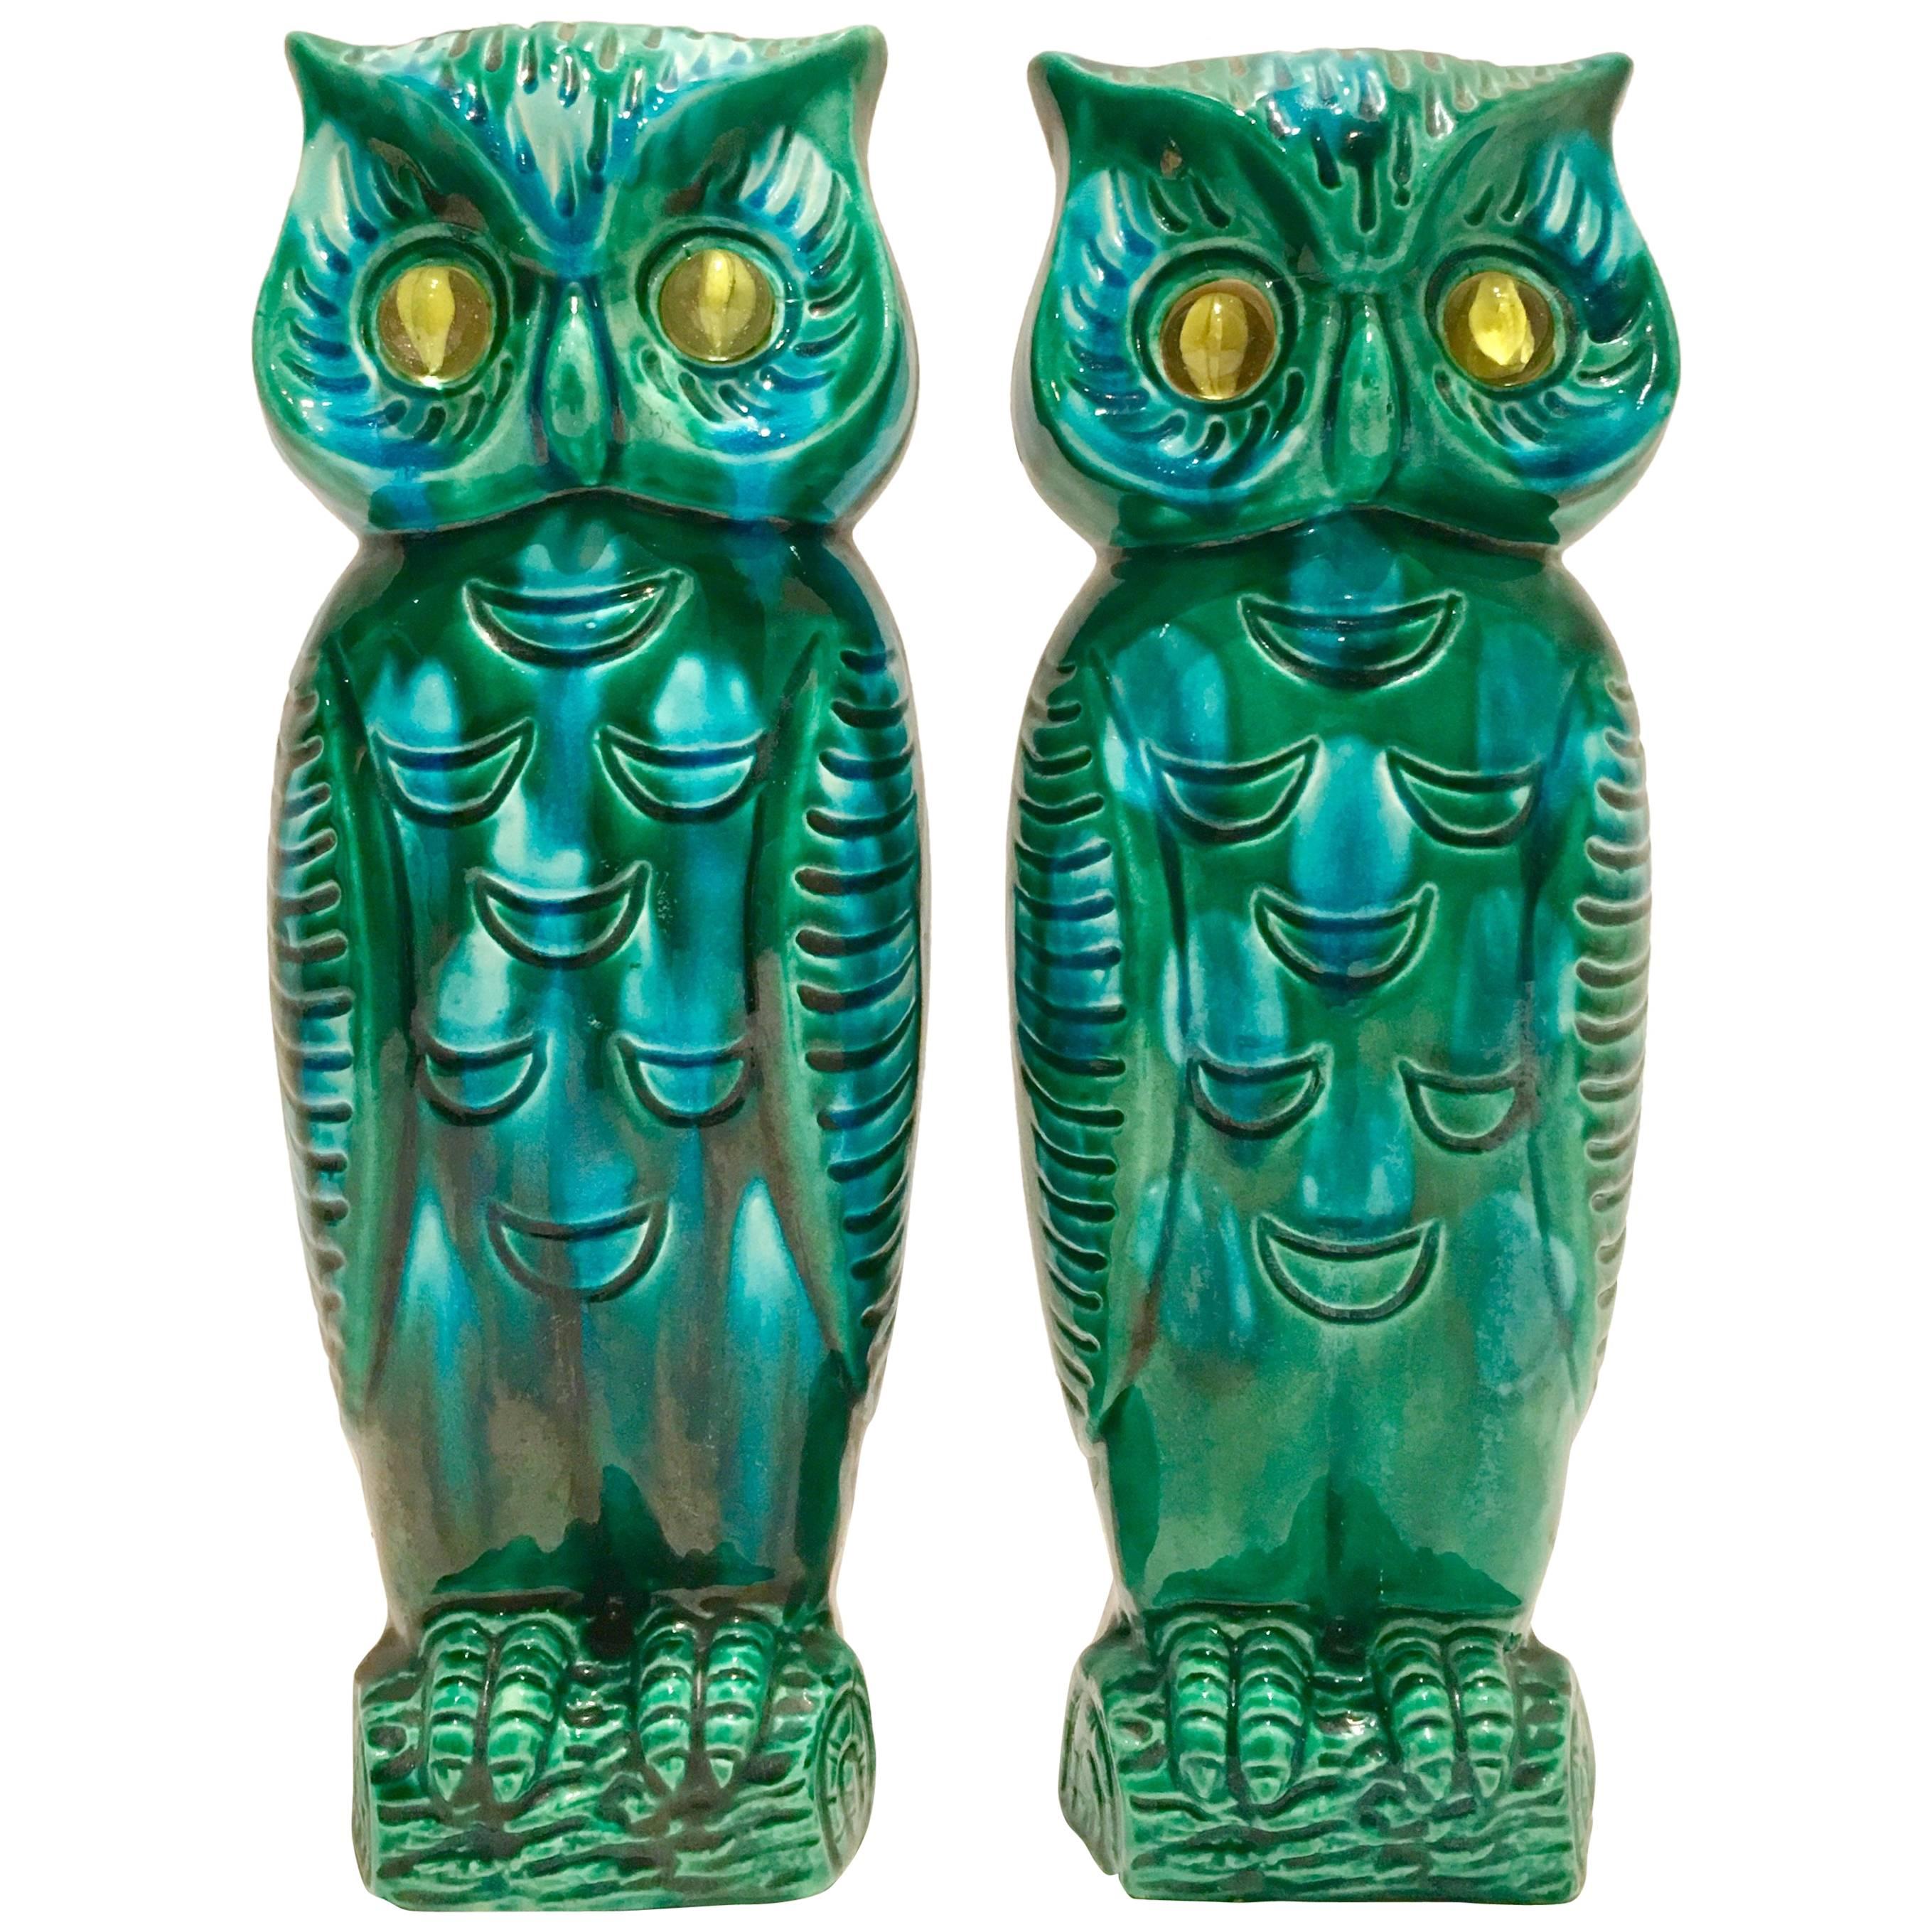 Mid-Century Japanese Pair of Ceramic Glaze "Google" Eye Owl Vases By Giftcraft For Sale